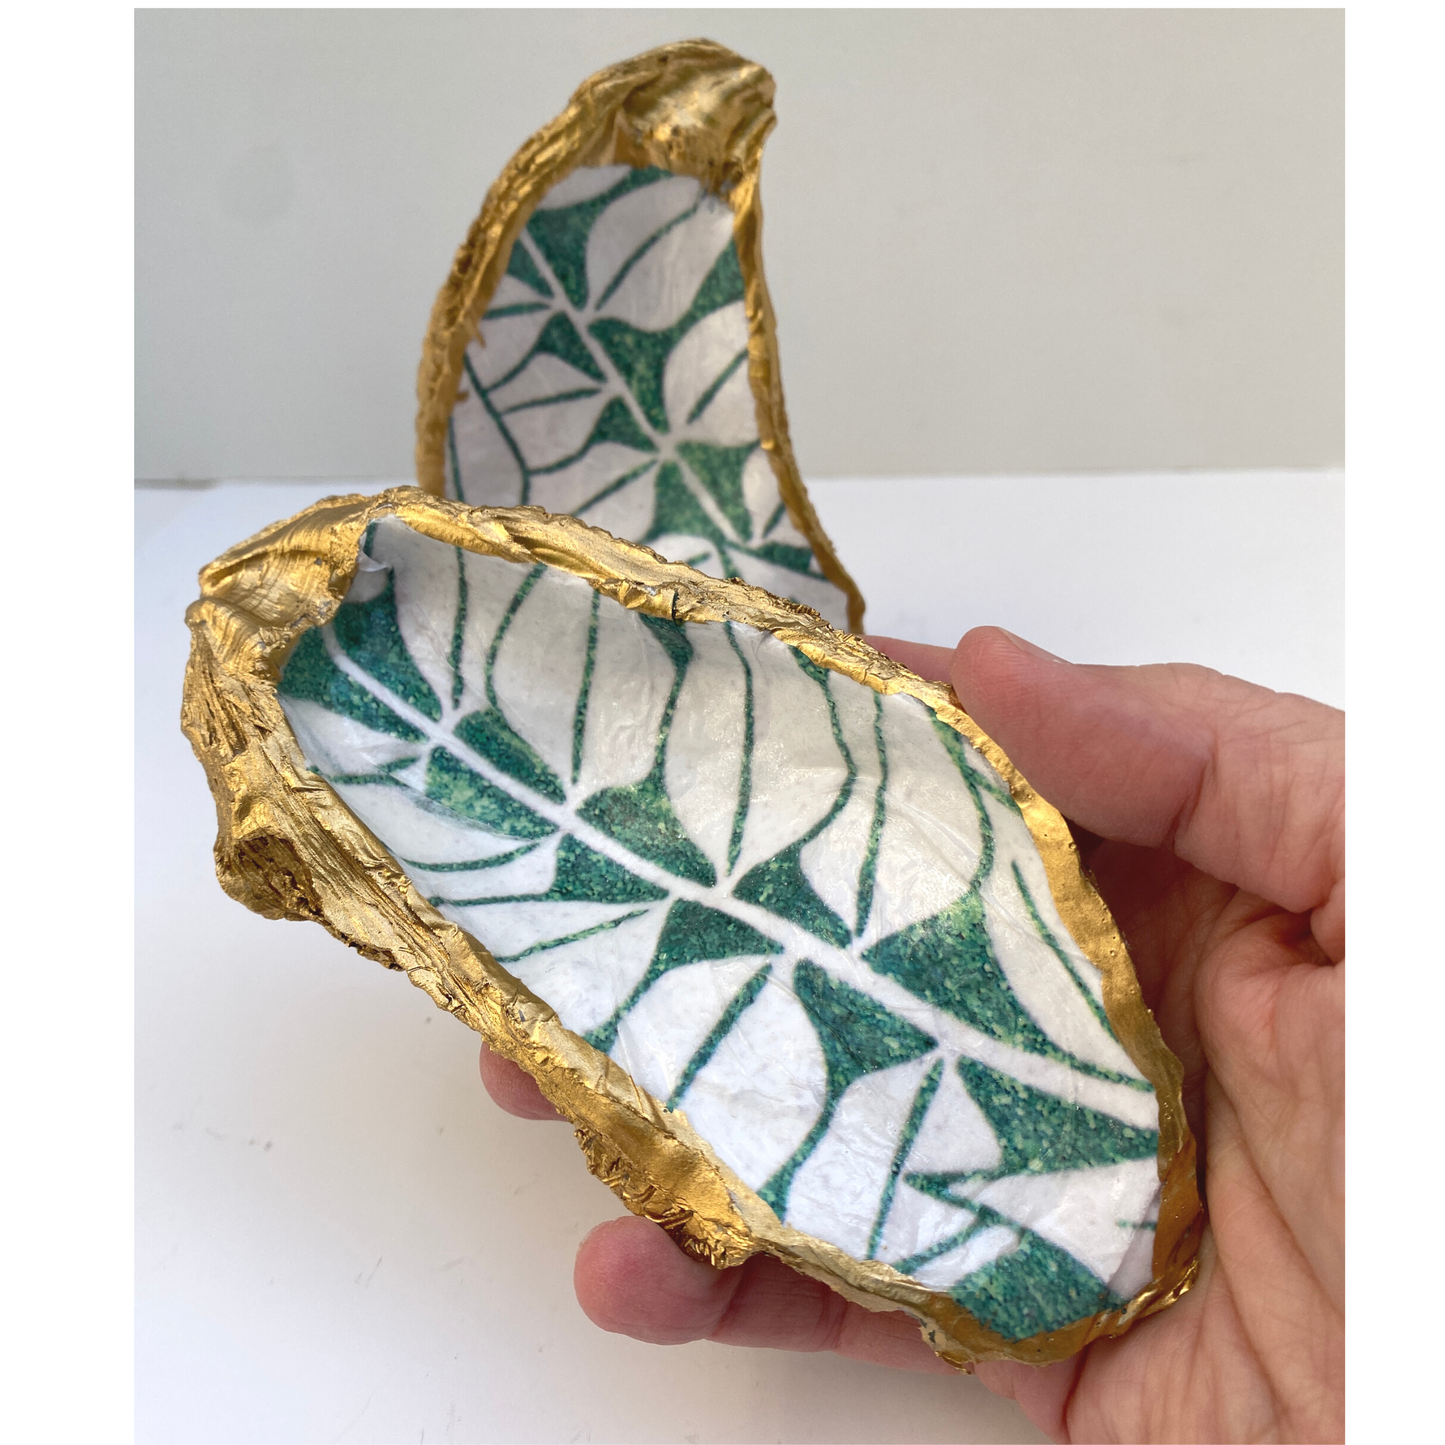 Oyster Shell Art, William Morris Inspired, Green and White Leaf Design